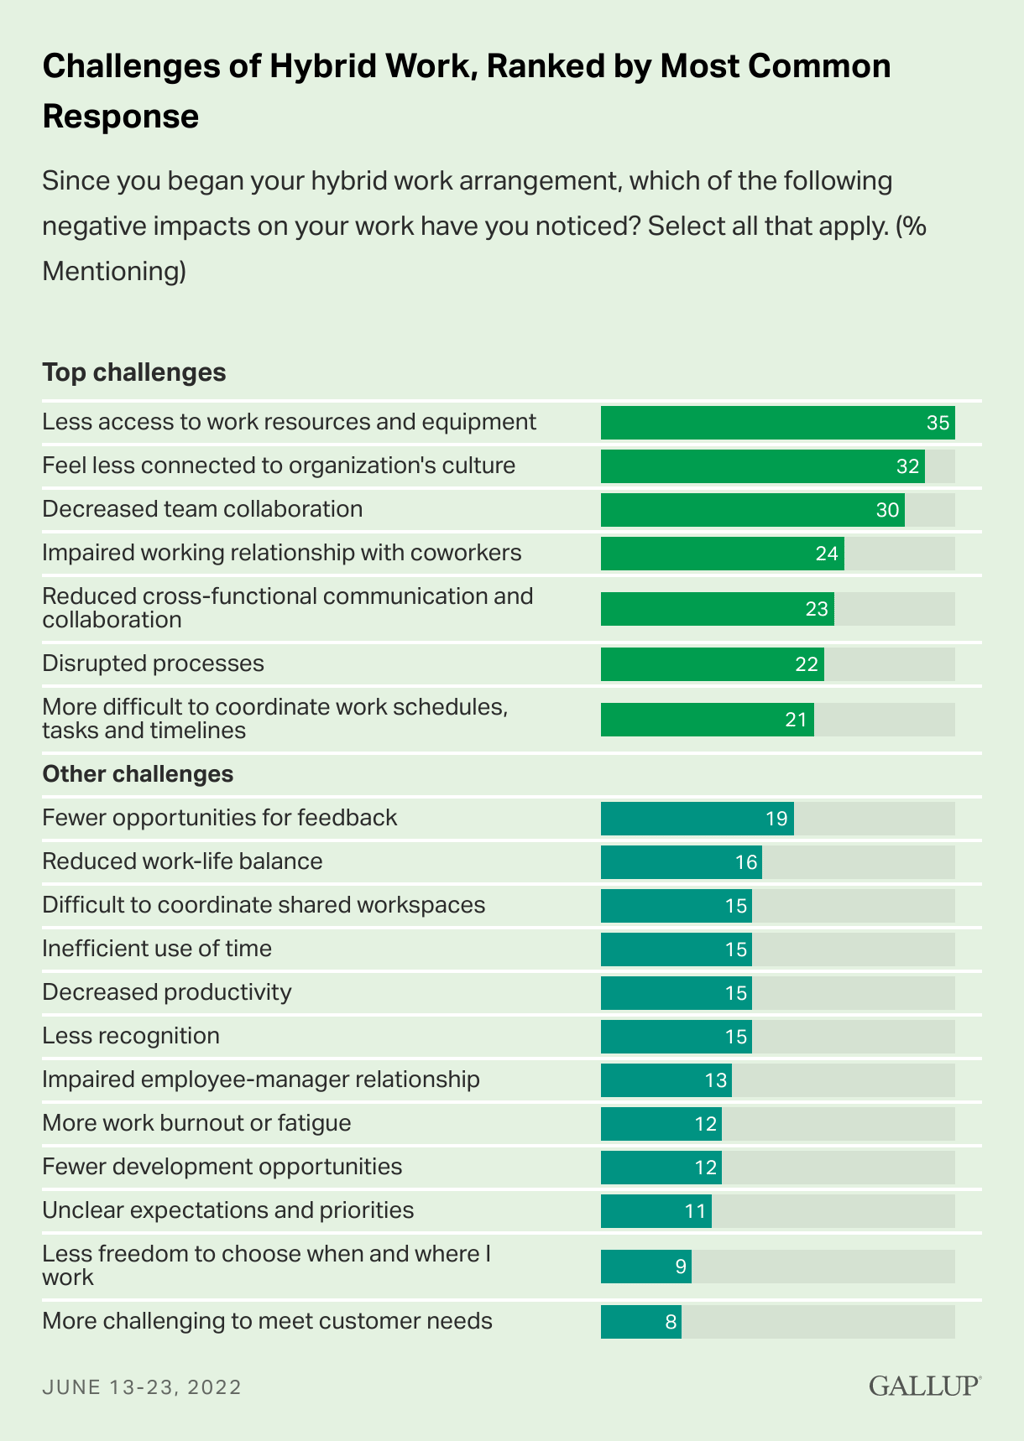 gallup-challenges-of-hybrid-work-ranked-by-most-common-response